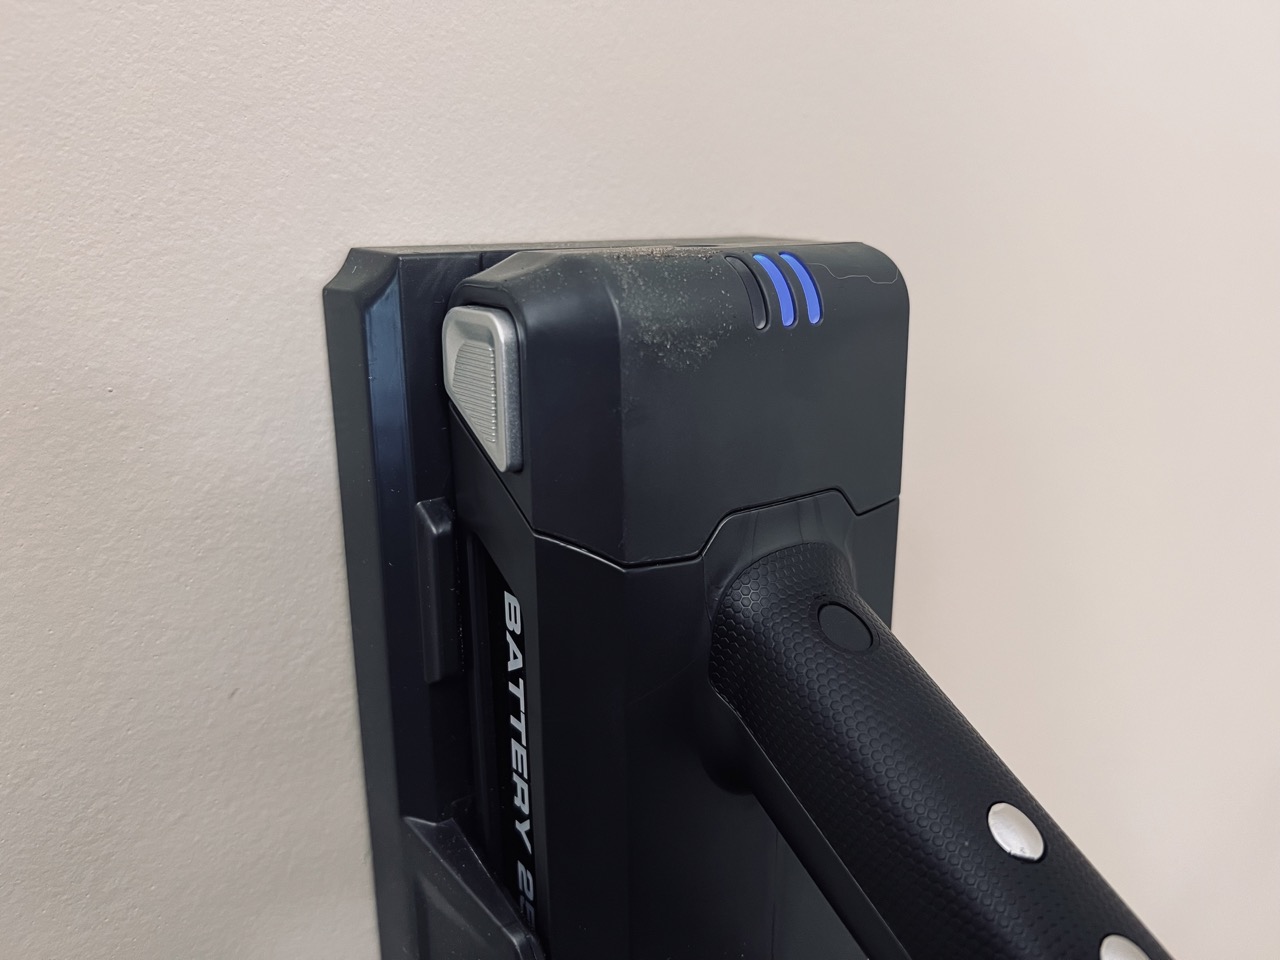 The Levoit VortexIQ 40 charging on its wall mount.